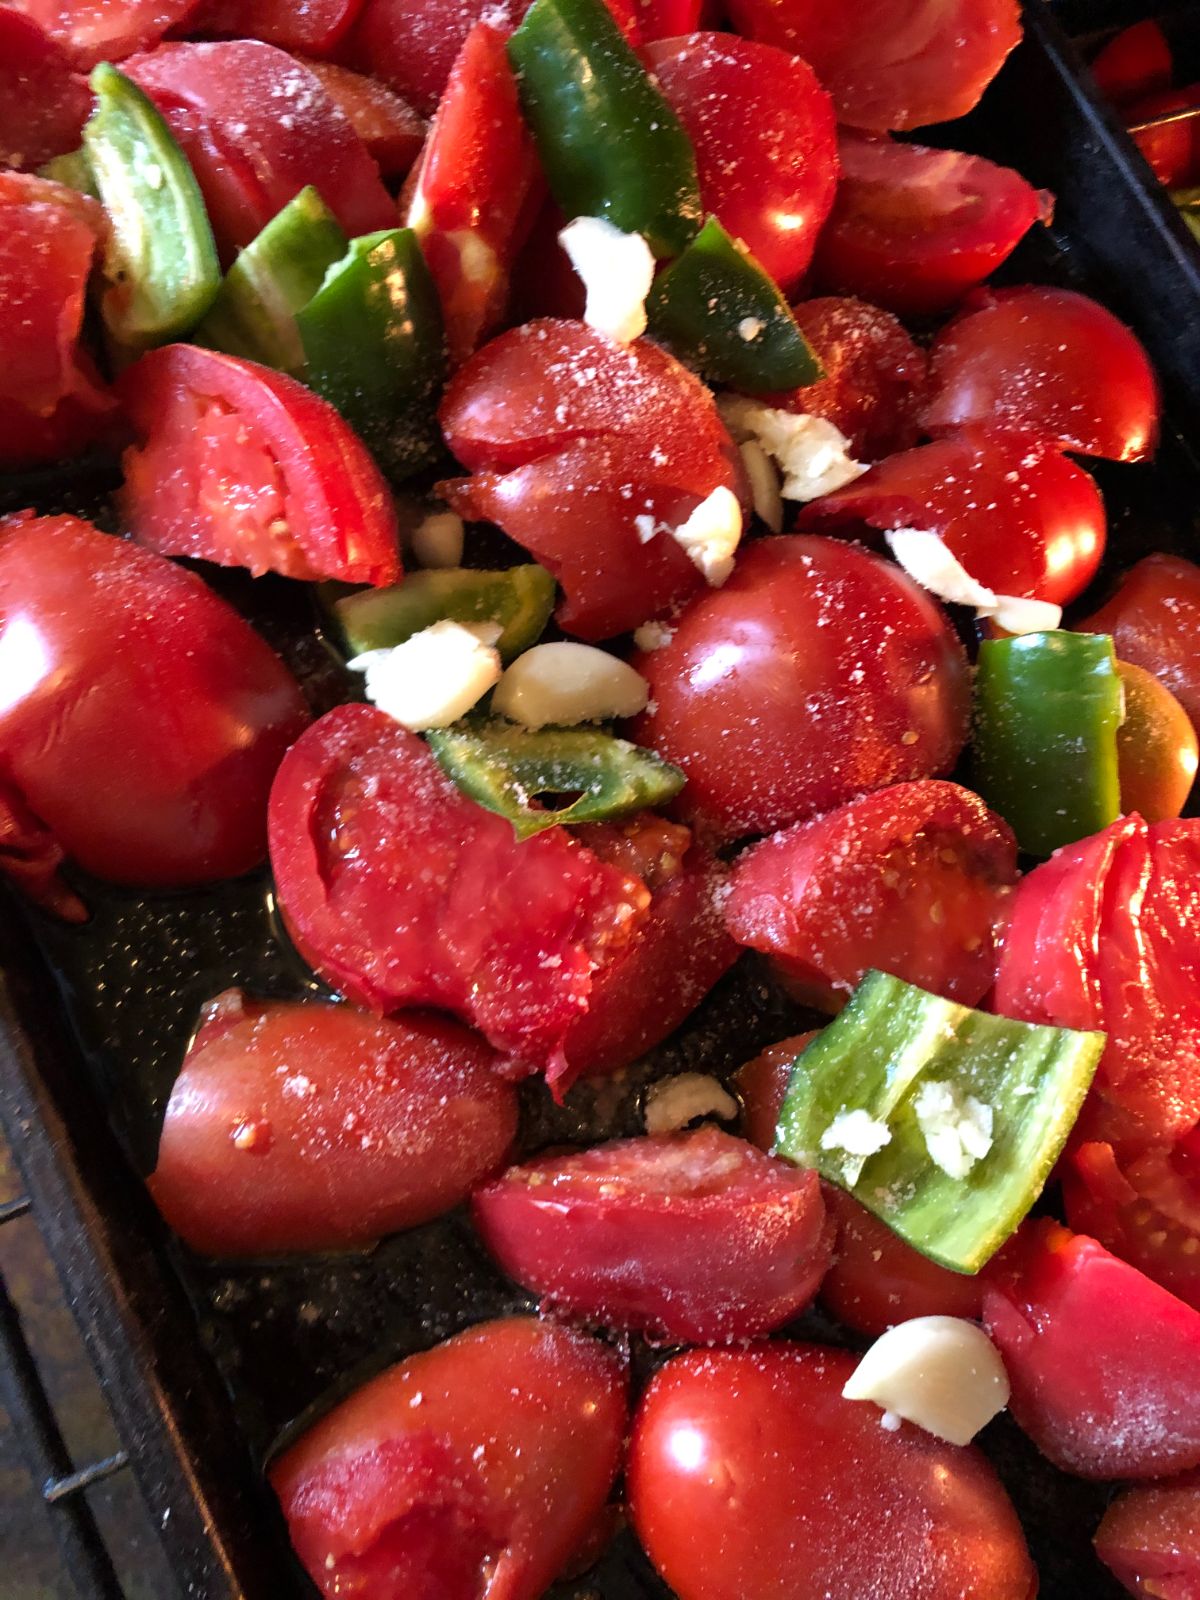 A pan of prepared tomatoes, peppers, and garlic for making tomato sauce